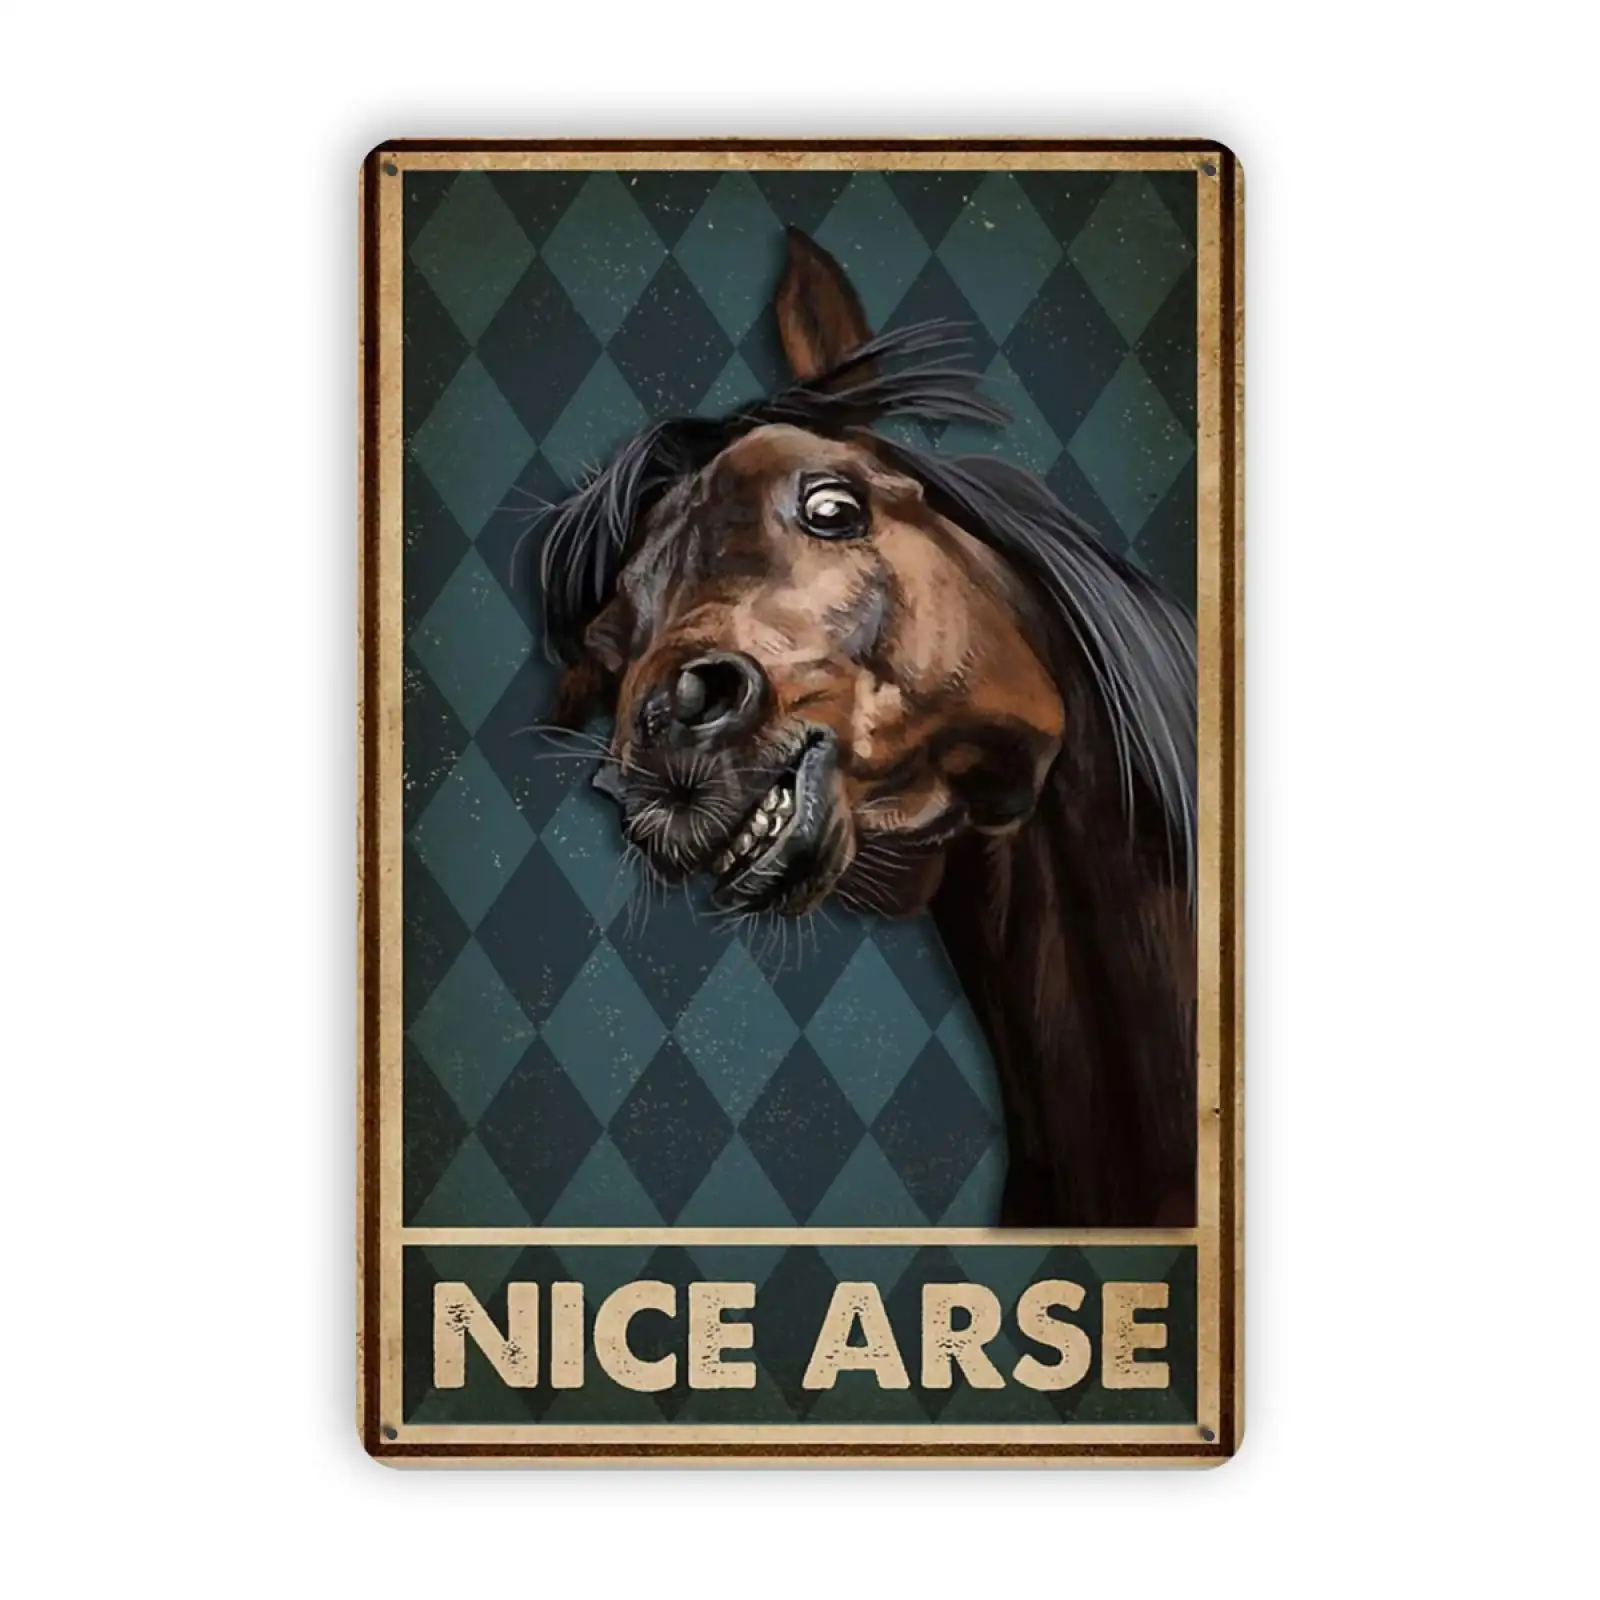 

Nice Arse Horse Vintage Tin Signs, Retro Metal Sign Wall Plaque Decor Funny Gifts for Bar Restaurant Home Decoration Mural